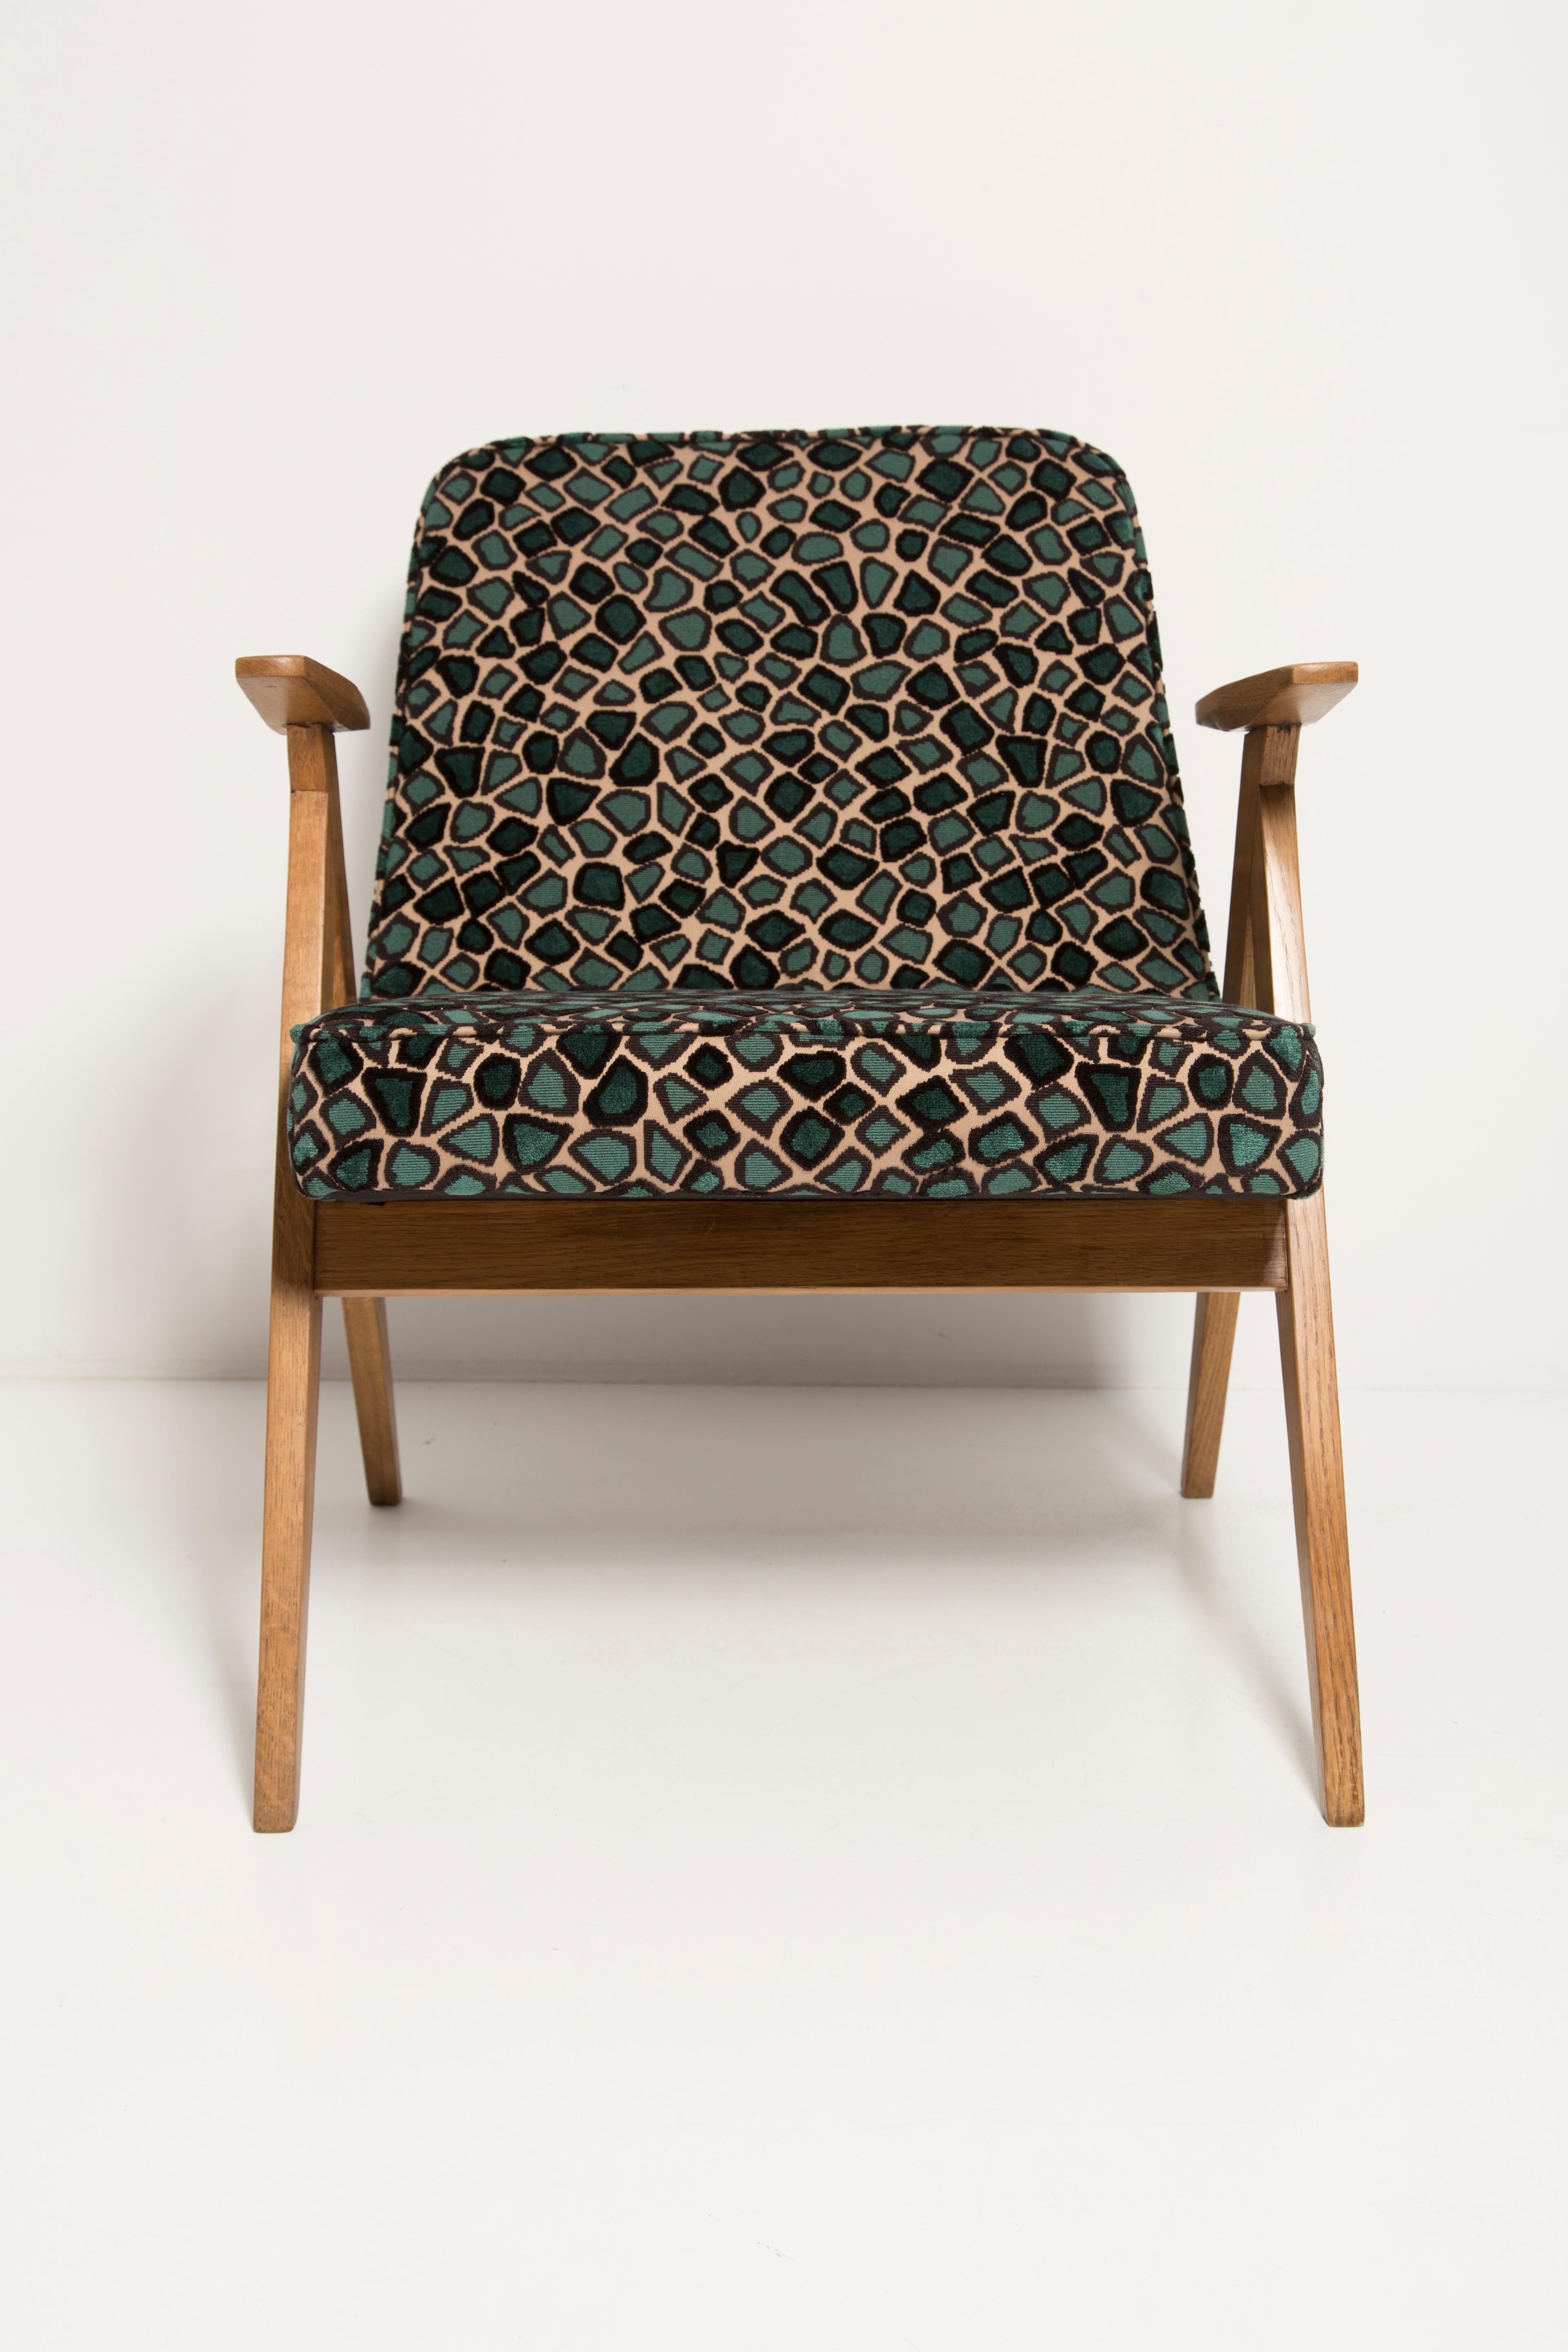 Two Mid Century 366 Armchairs in Leopard Velvet, by Chierowski, Europe, 1960s For Sale 2